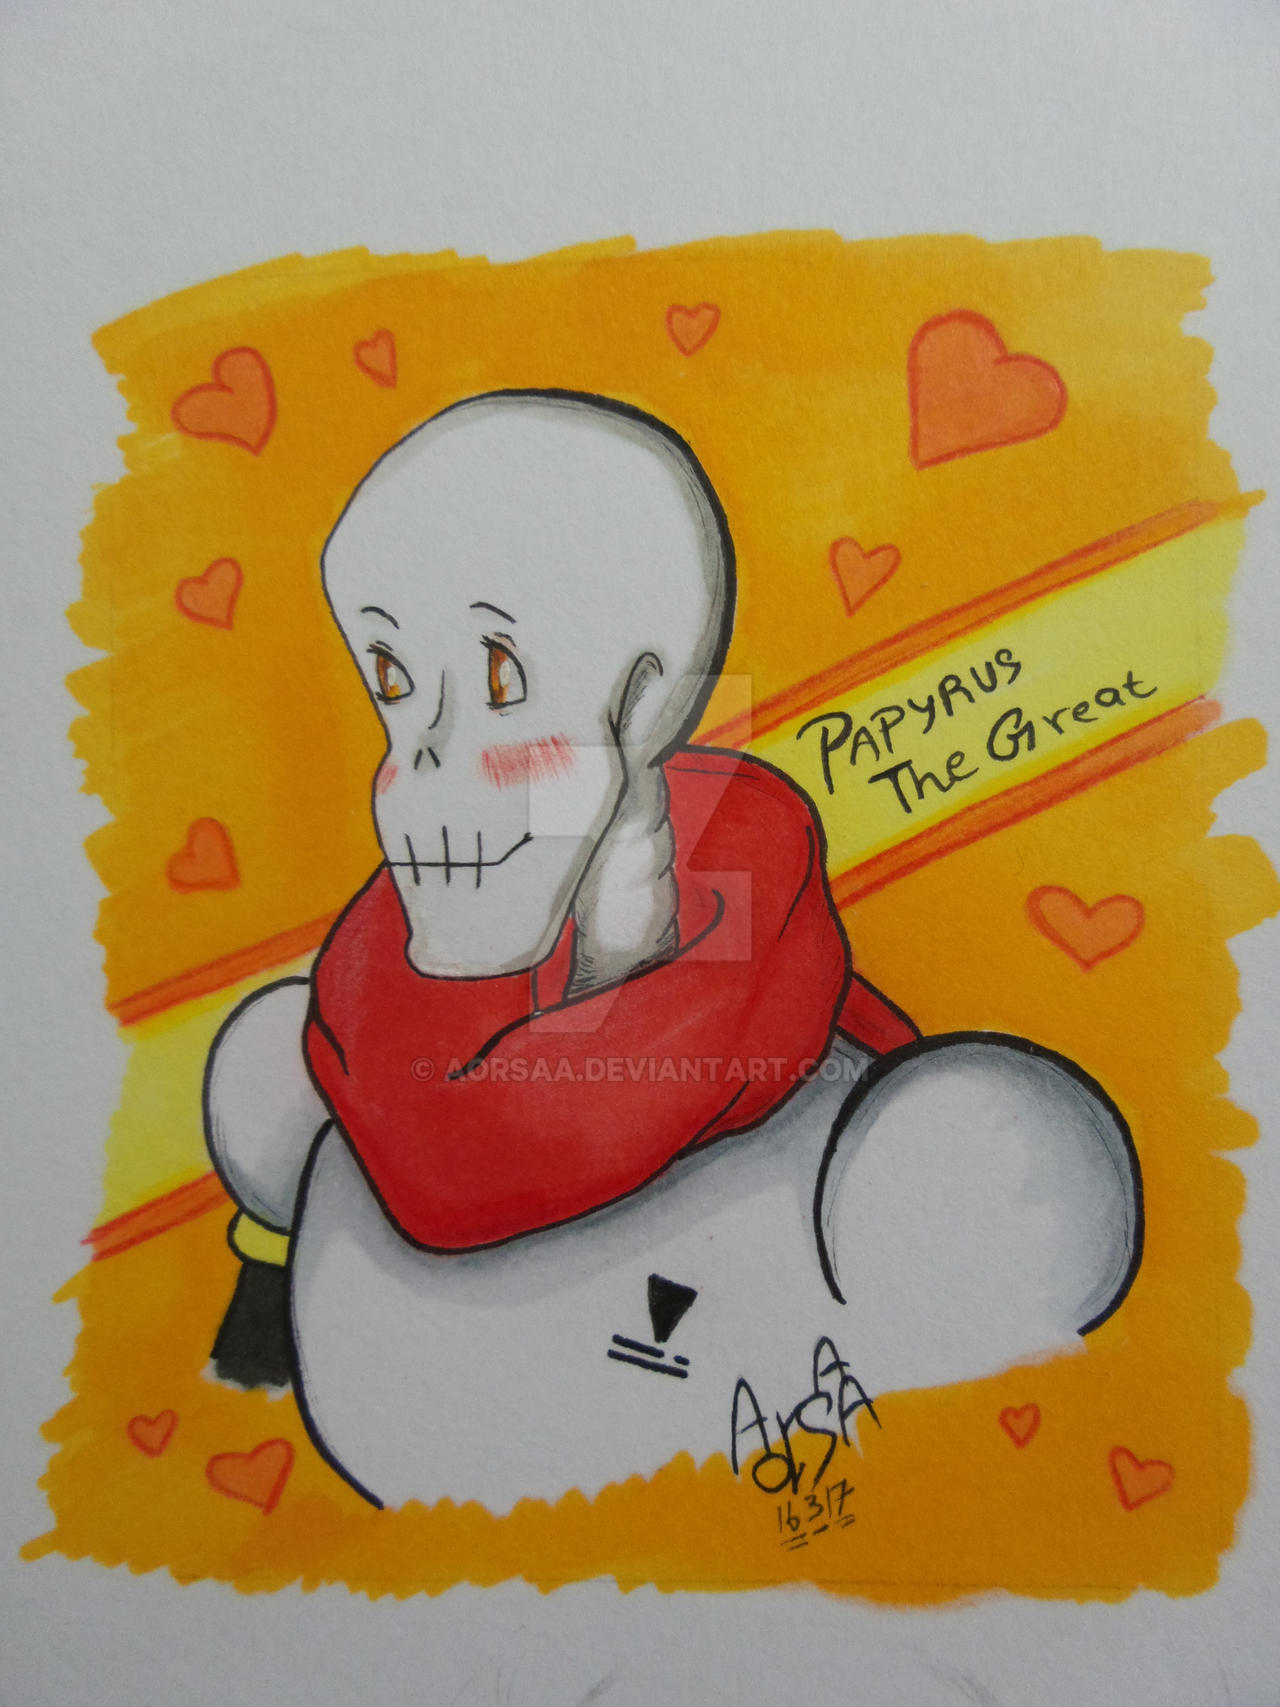 Papyrus the great